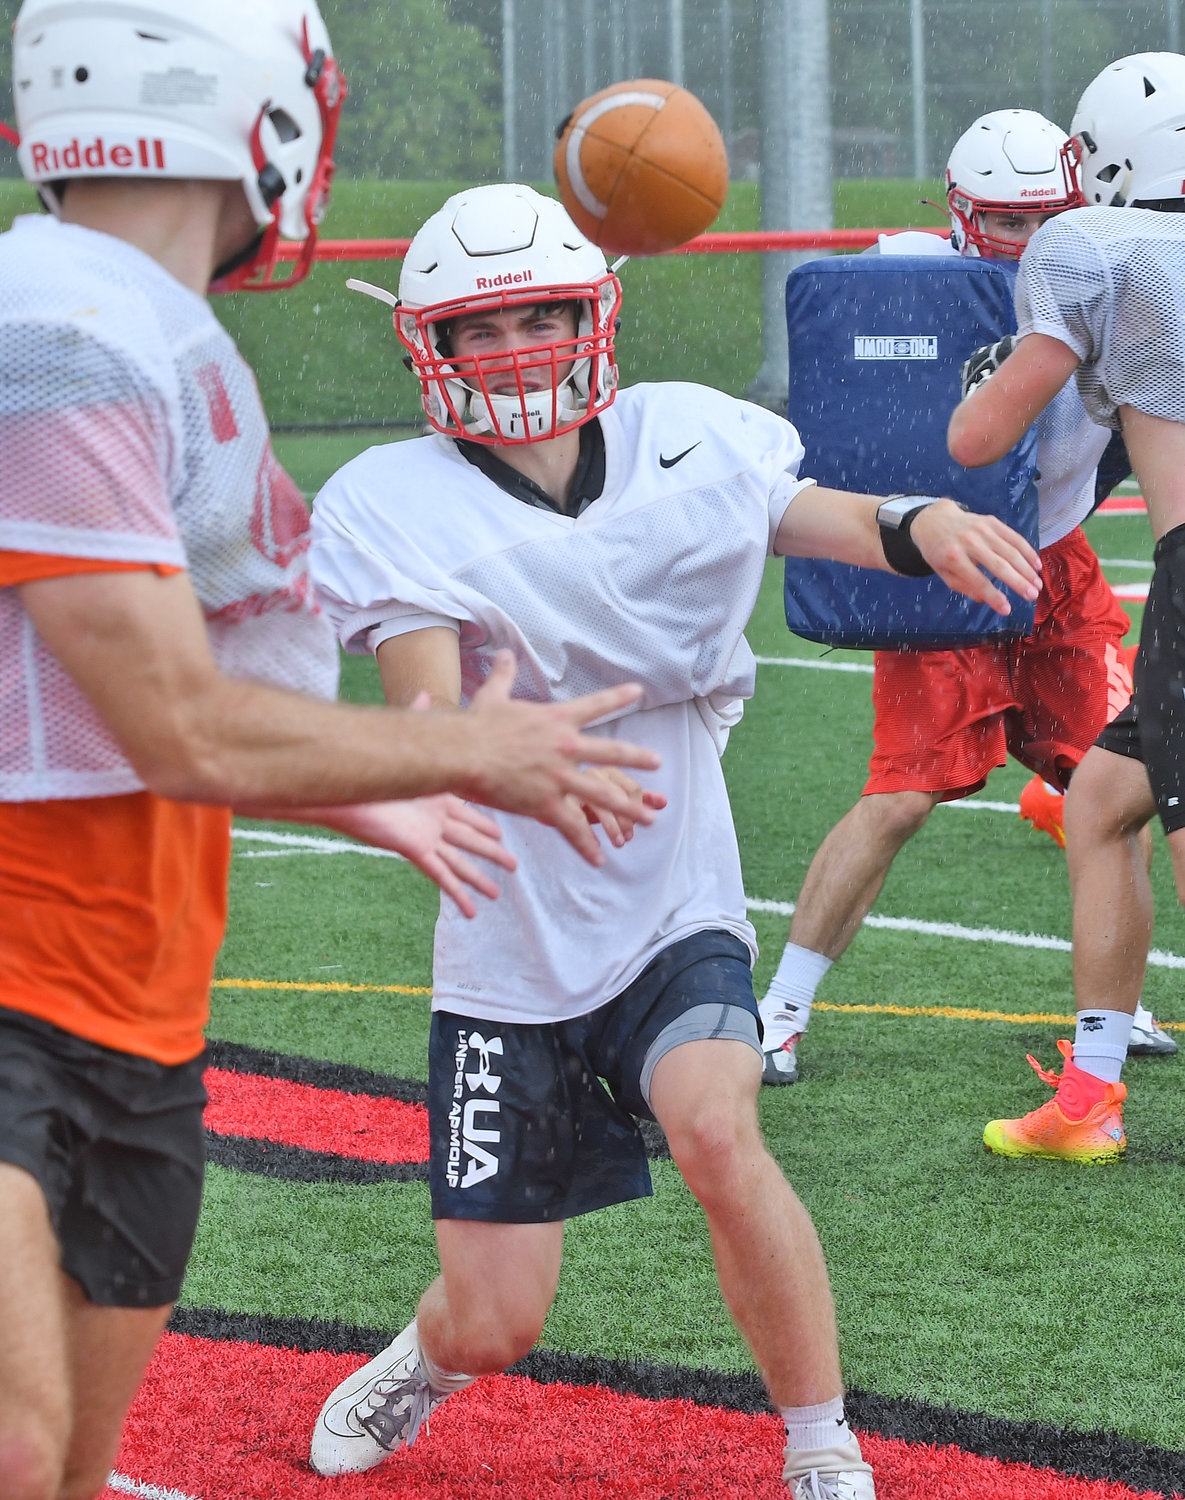 Senior Tyler Shantal makes a toss to an running back during practice. Shantal has a chance to claim the starting quarterback spot for Vernon-Verona-Sherrill. The Red Devils enter the season looking to replace a host of contributors on offense and defense.